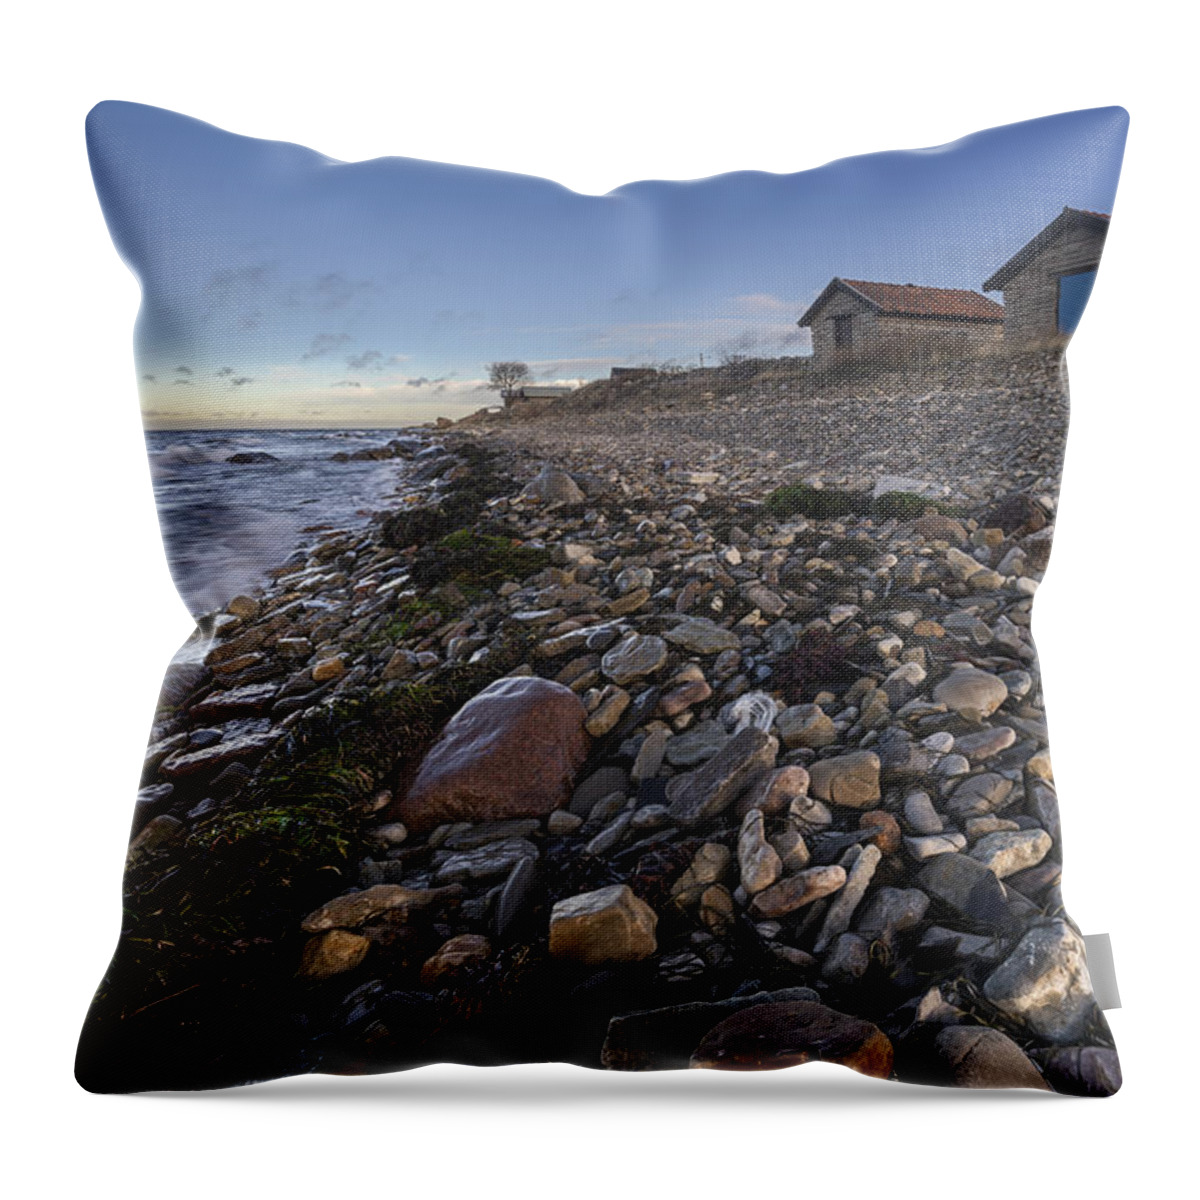 Baltic Sea Throw Pillow featuring the photograph Pebble Beach by Ludwig Riml